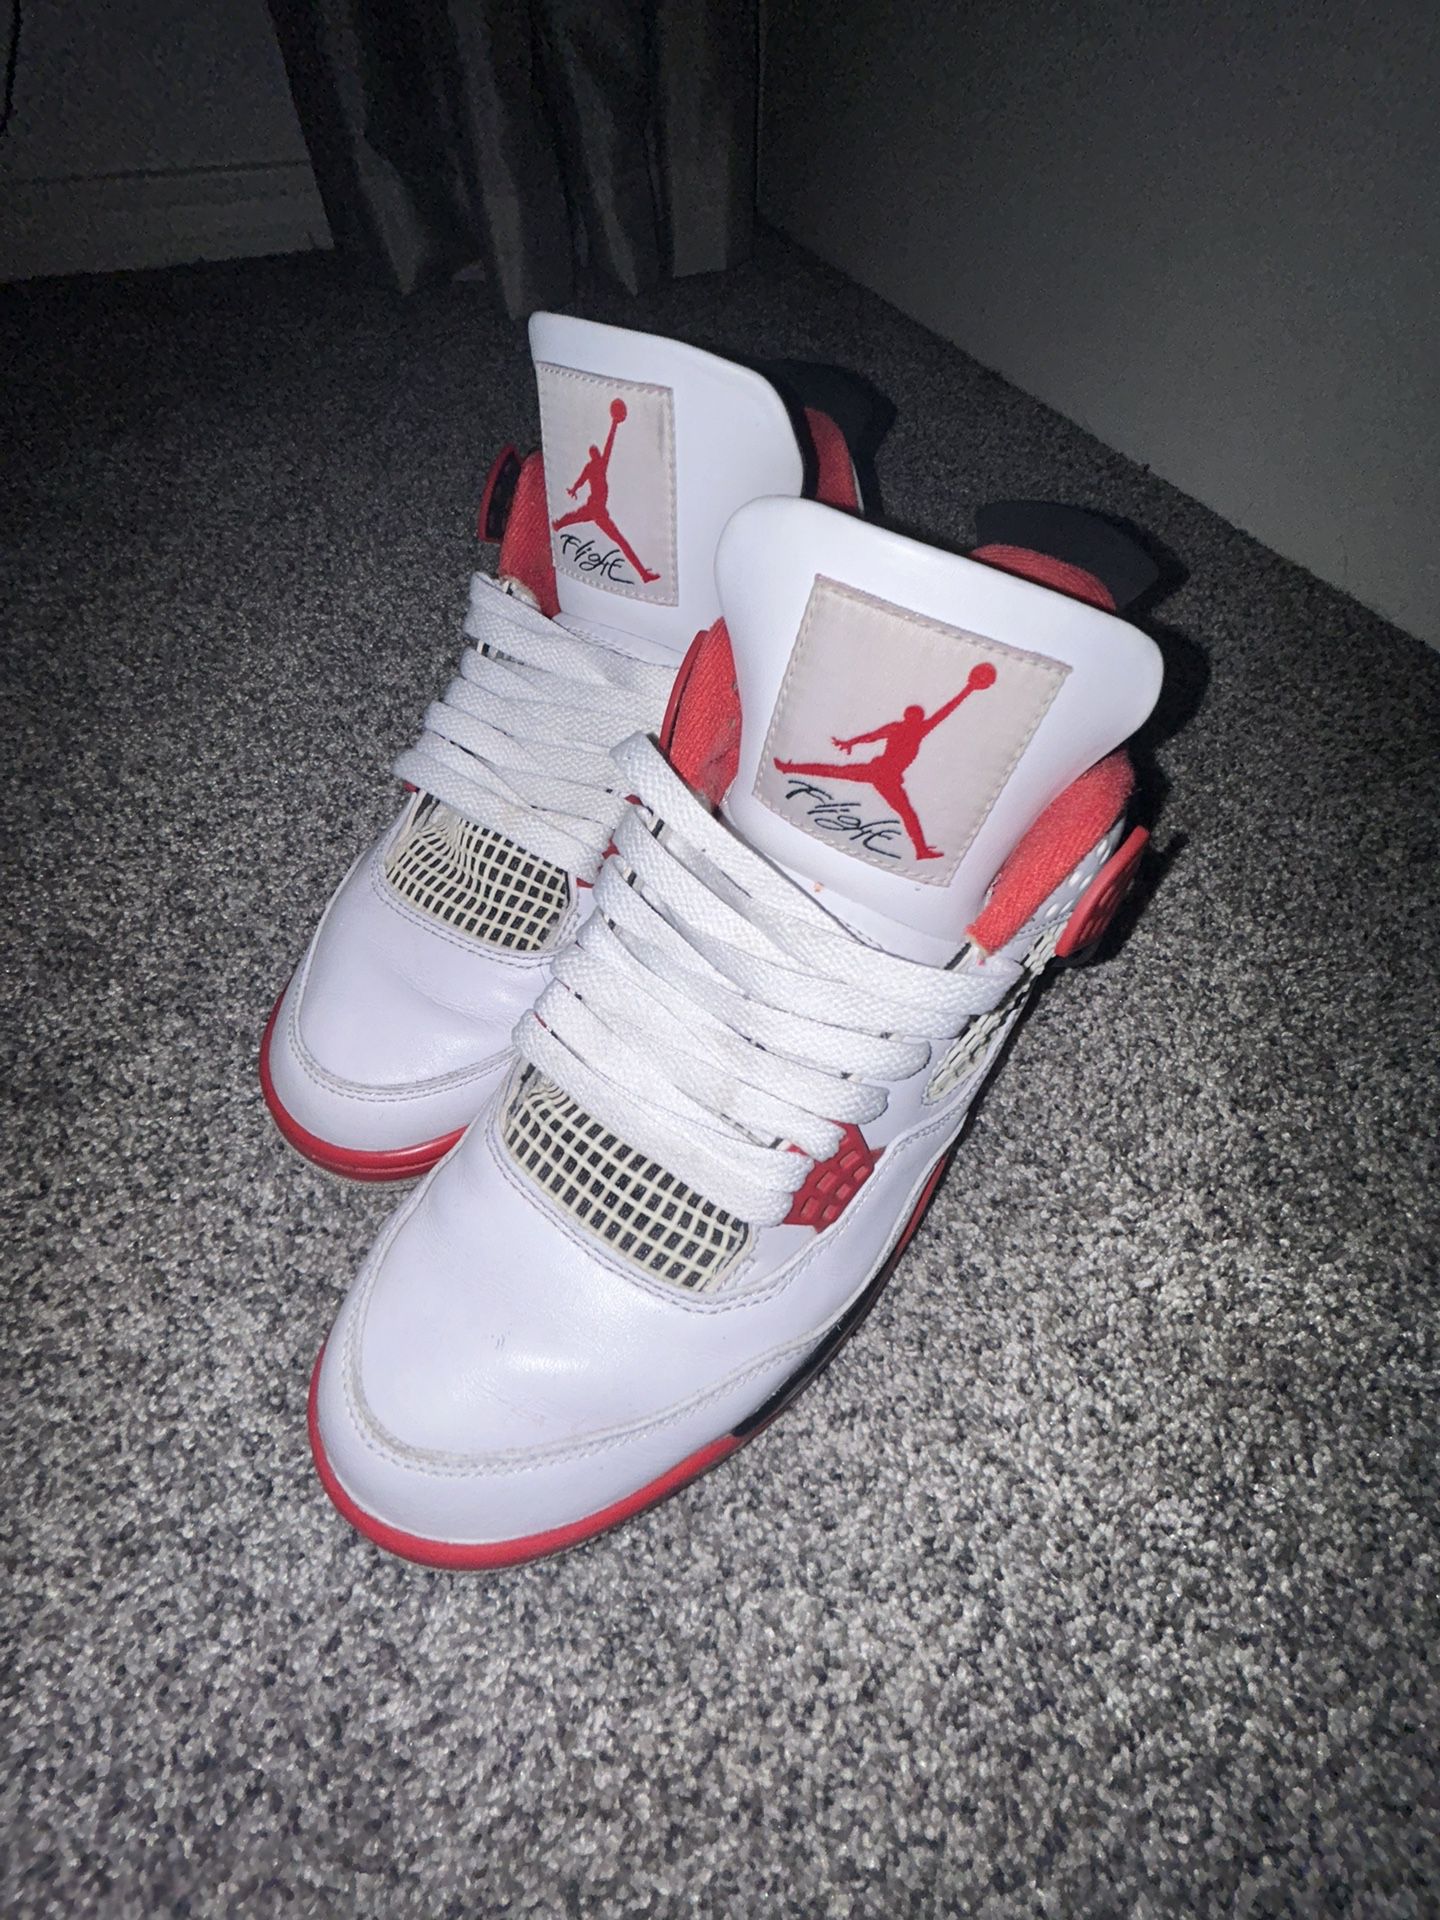 Jordan 4 Fire Red Size 9 Barely Used 